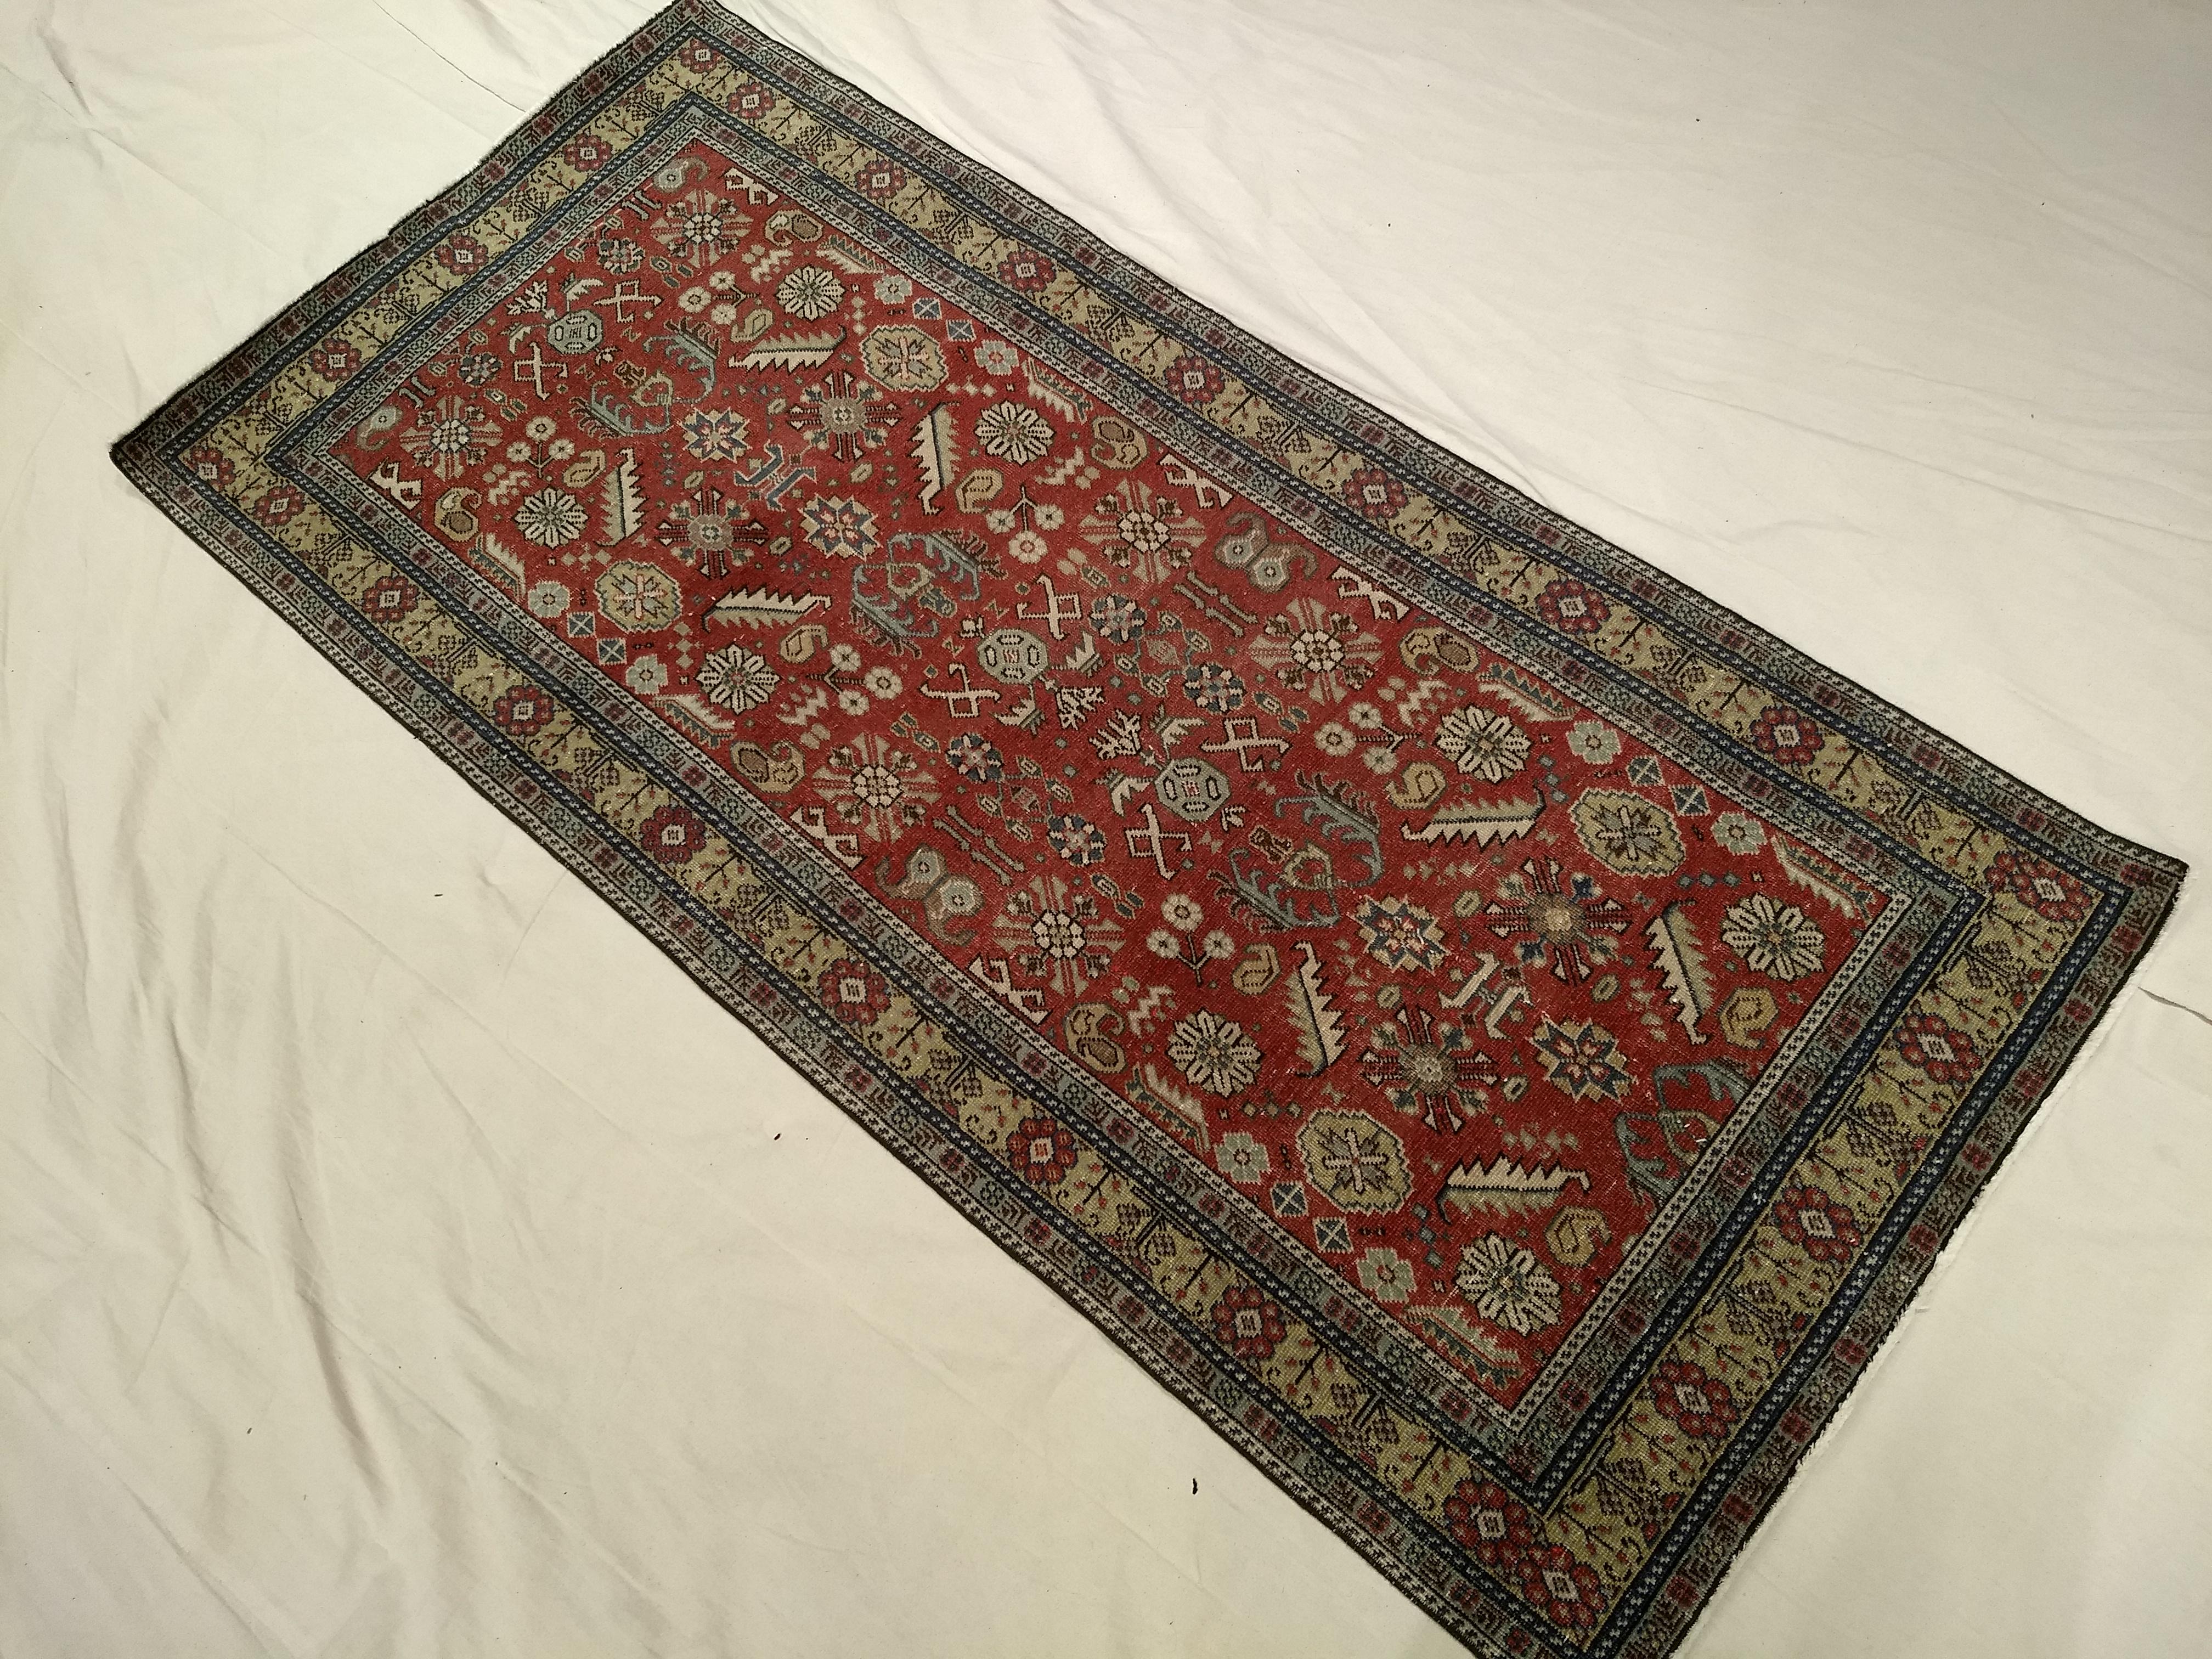 Vintage Khotan Area Rug in Allover Geometric Pattern on Brick Red, Yellow, Ivory For Sale 6